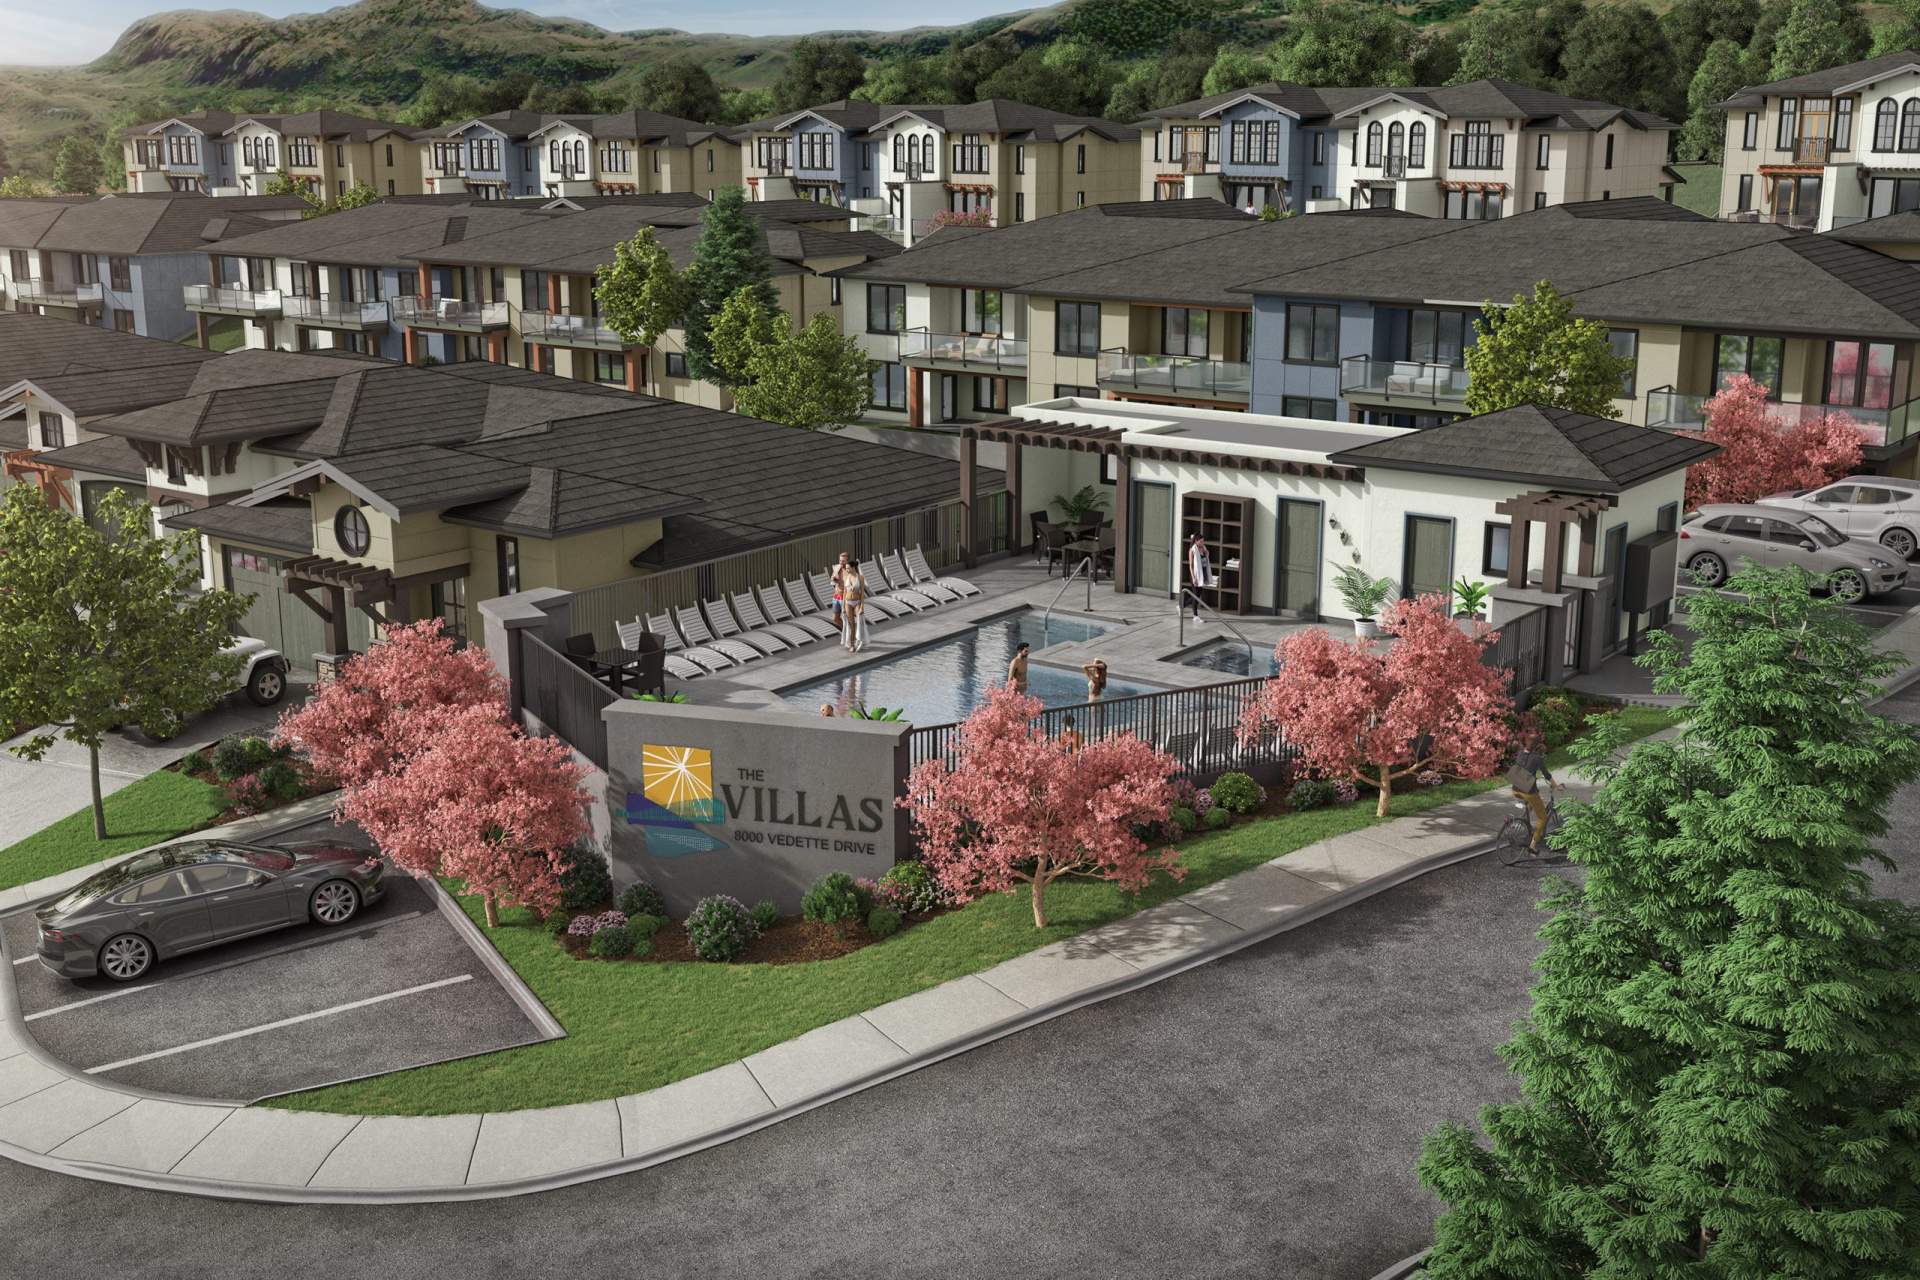 A collection of 54 spacious 3- or 4-bedroom lakefront townhomes.